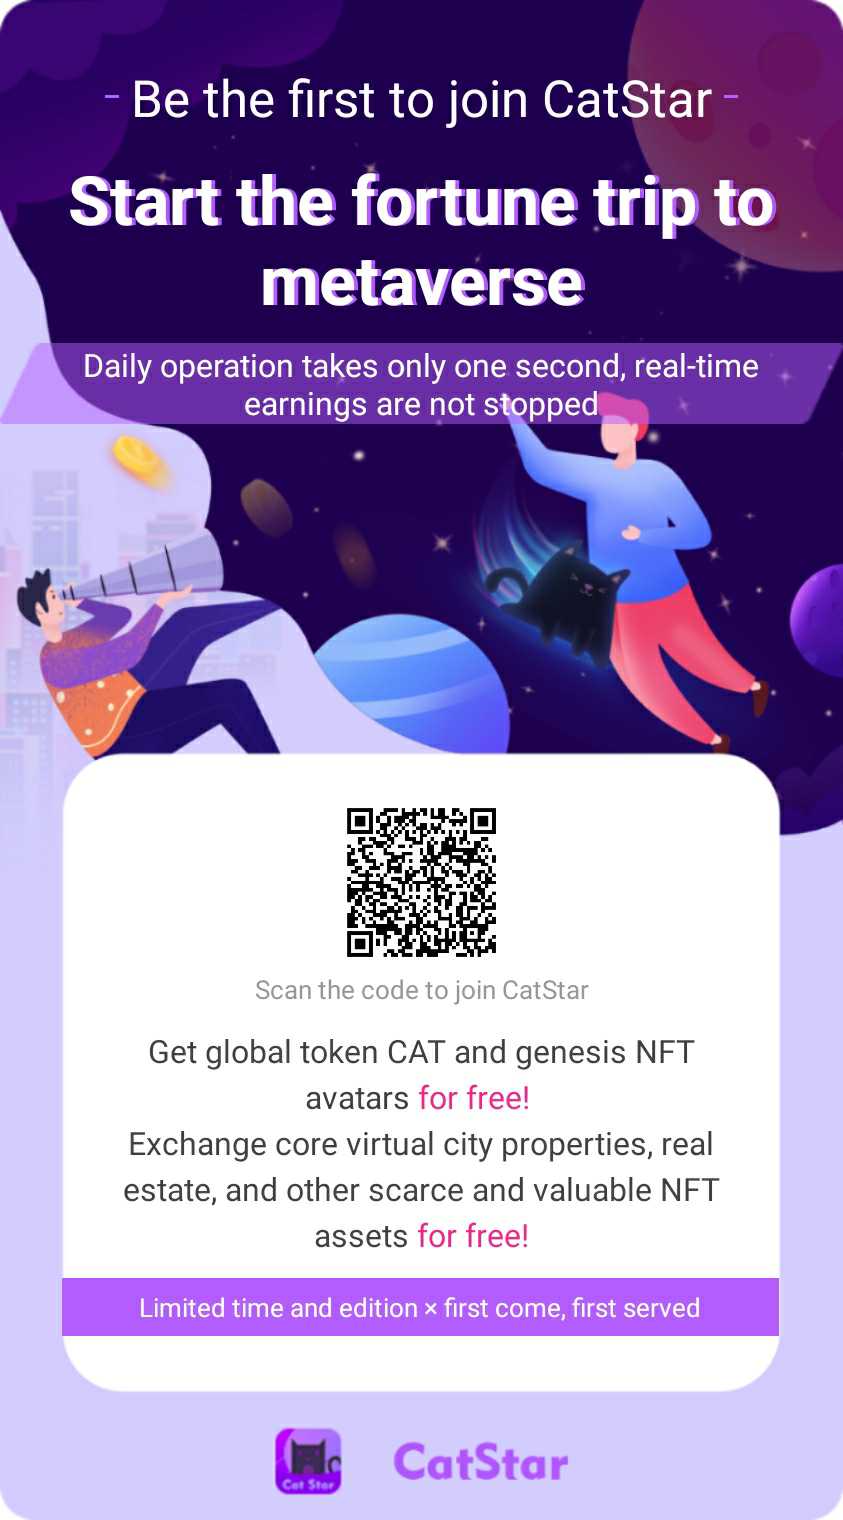 Cat Star - Start the fortune trip to metaverse